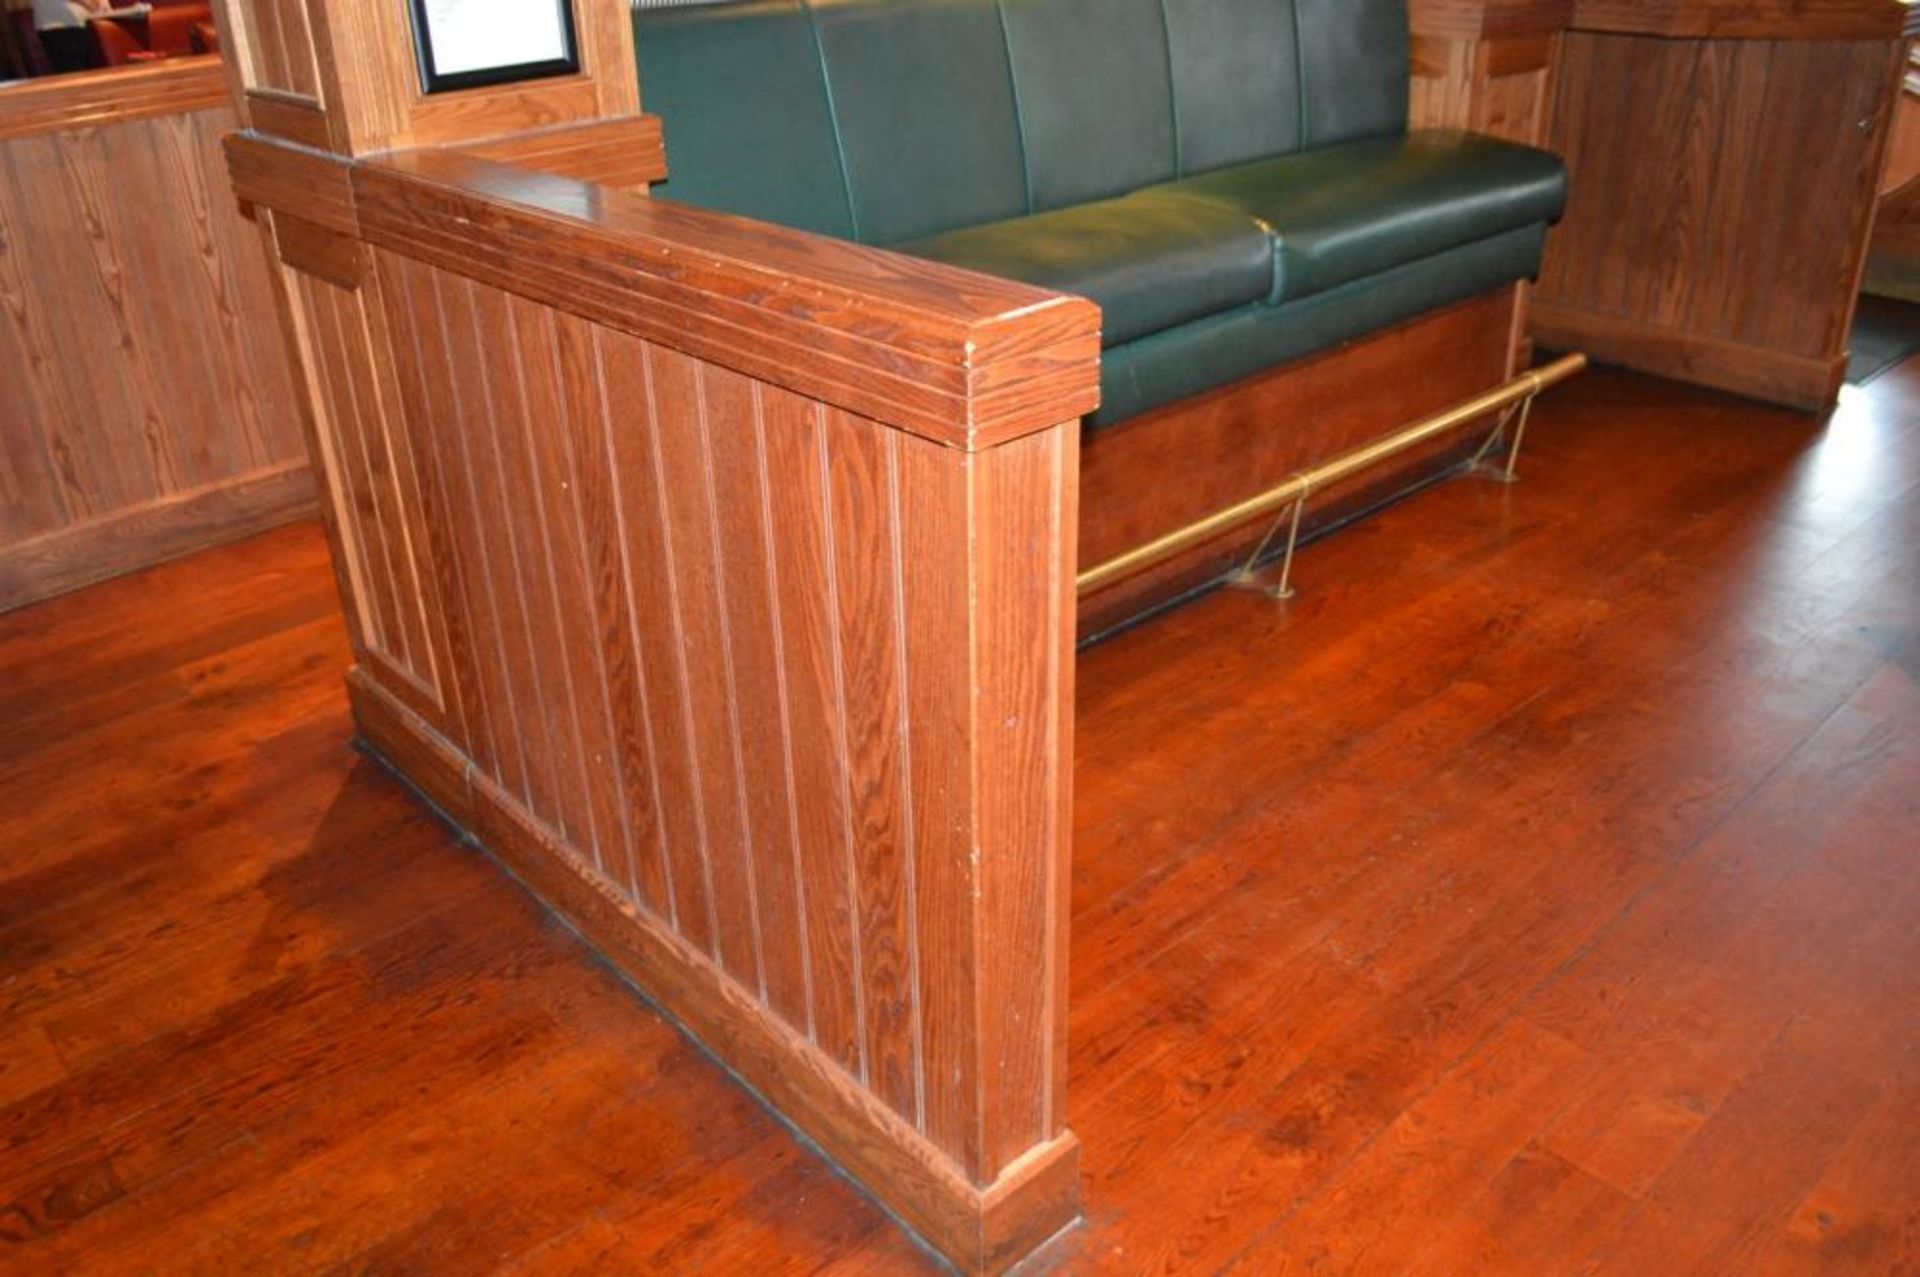 1 x Bar Restaurant Room Partition With Seating Bench, Pillar, Wine Cabinet and Foot Rest - Overall S - Image 11 of 21